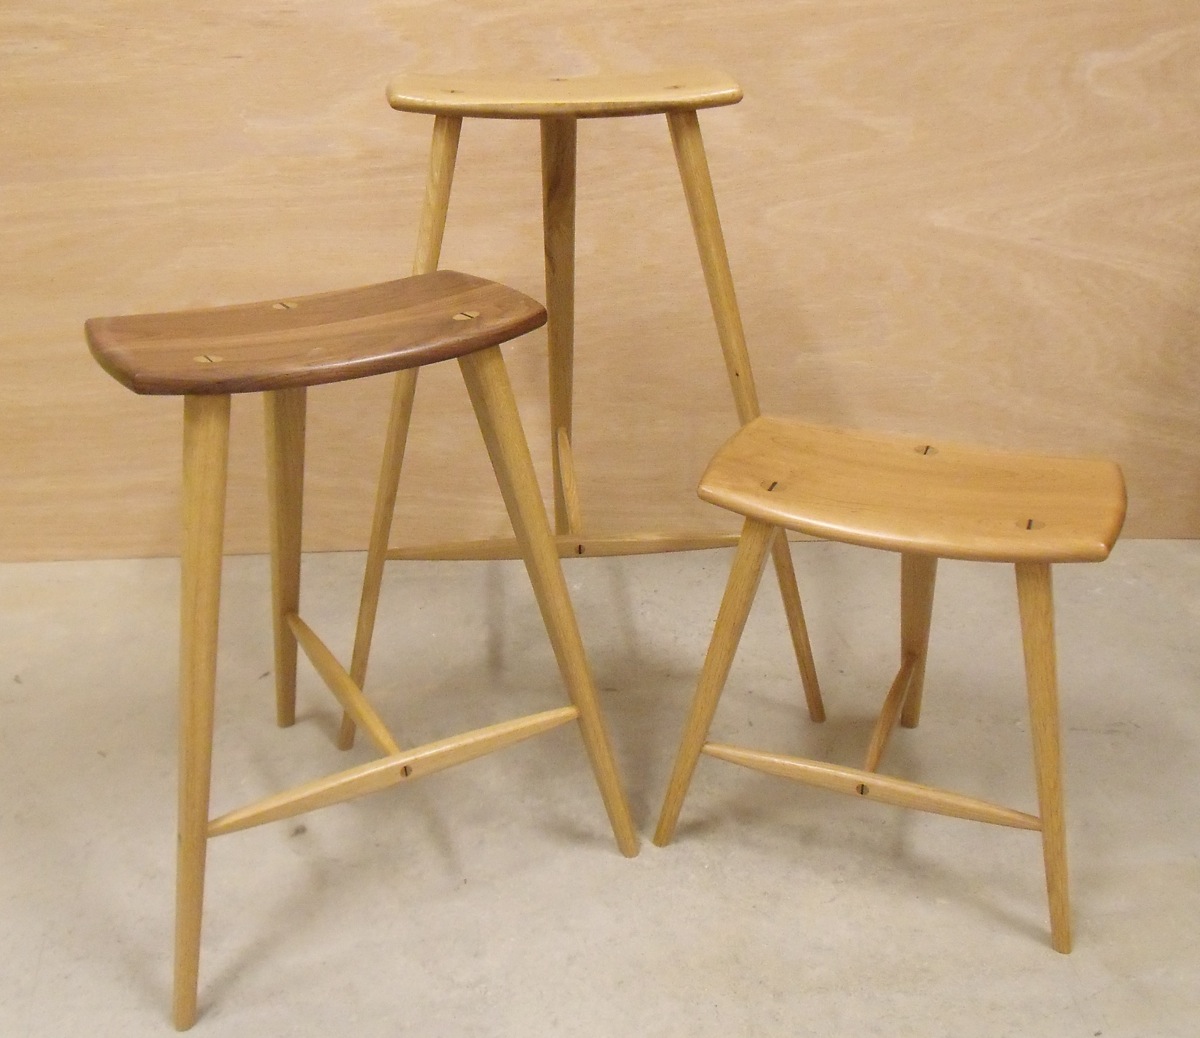 Legged Stool Woodworking Plans | Easy-To-Follow How To build a DIY 